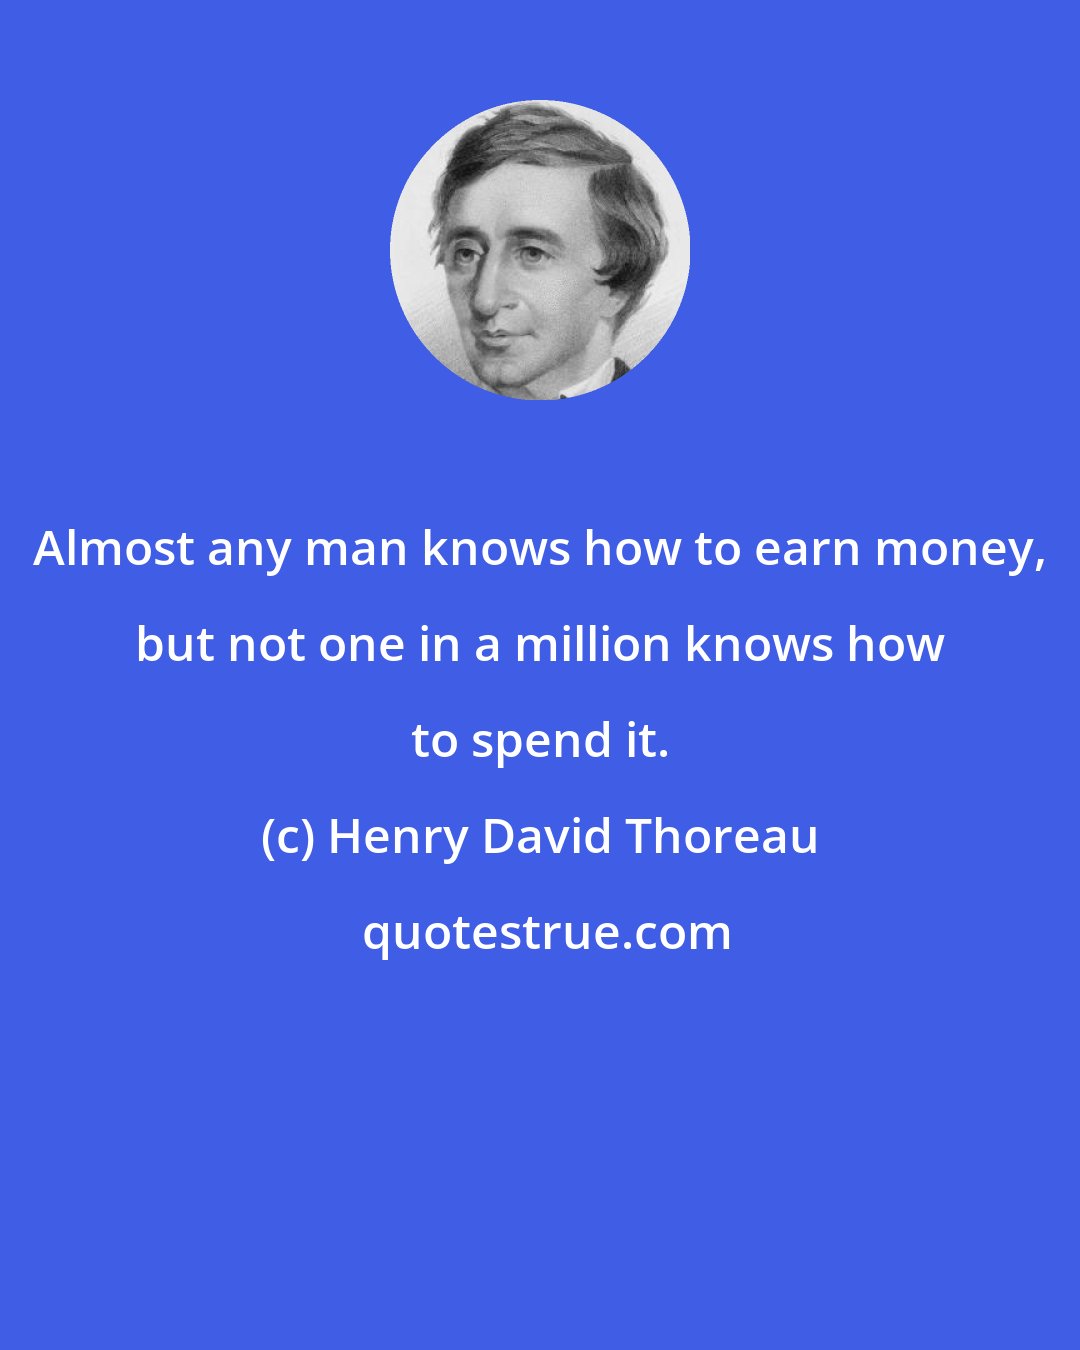 Henry David Thoreau: Almost any man knows how to earn money, but not one in a million knows how to spend it.